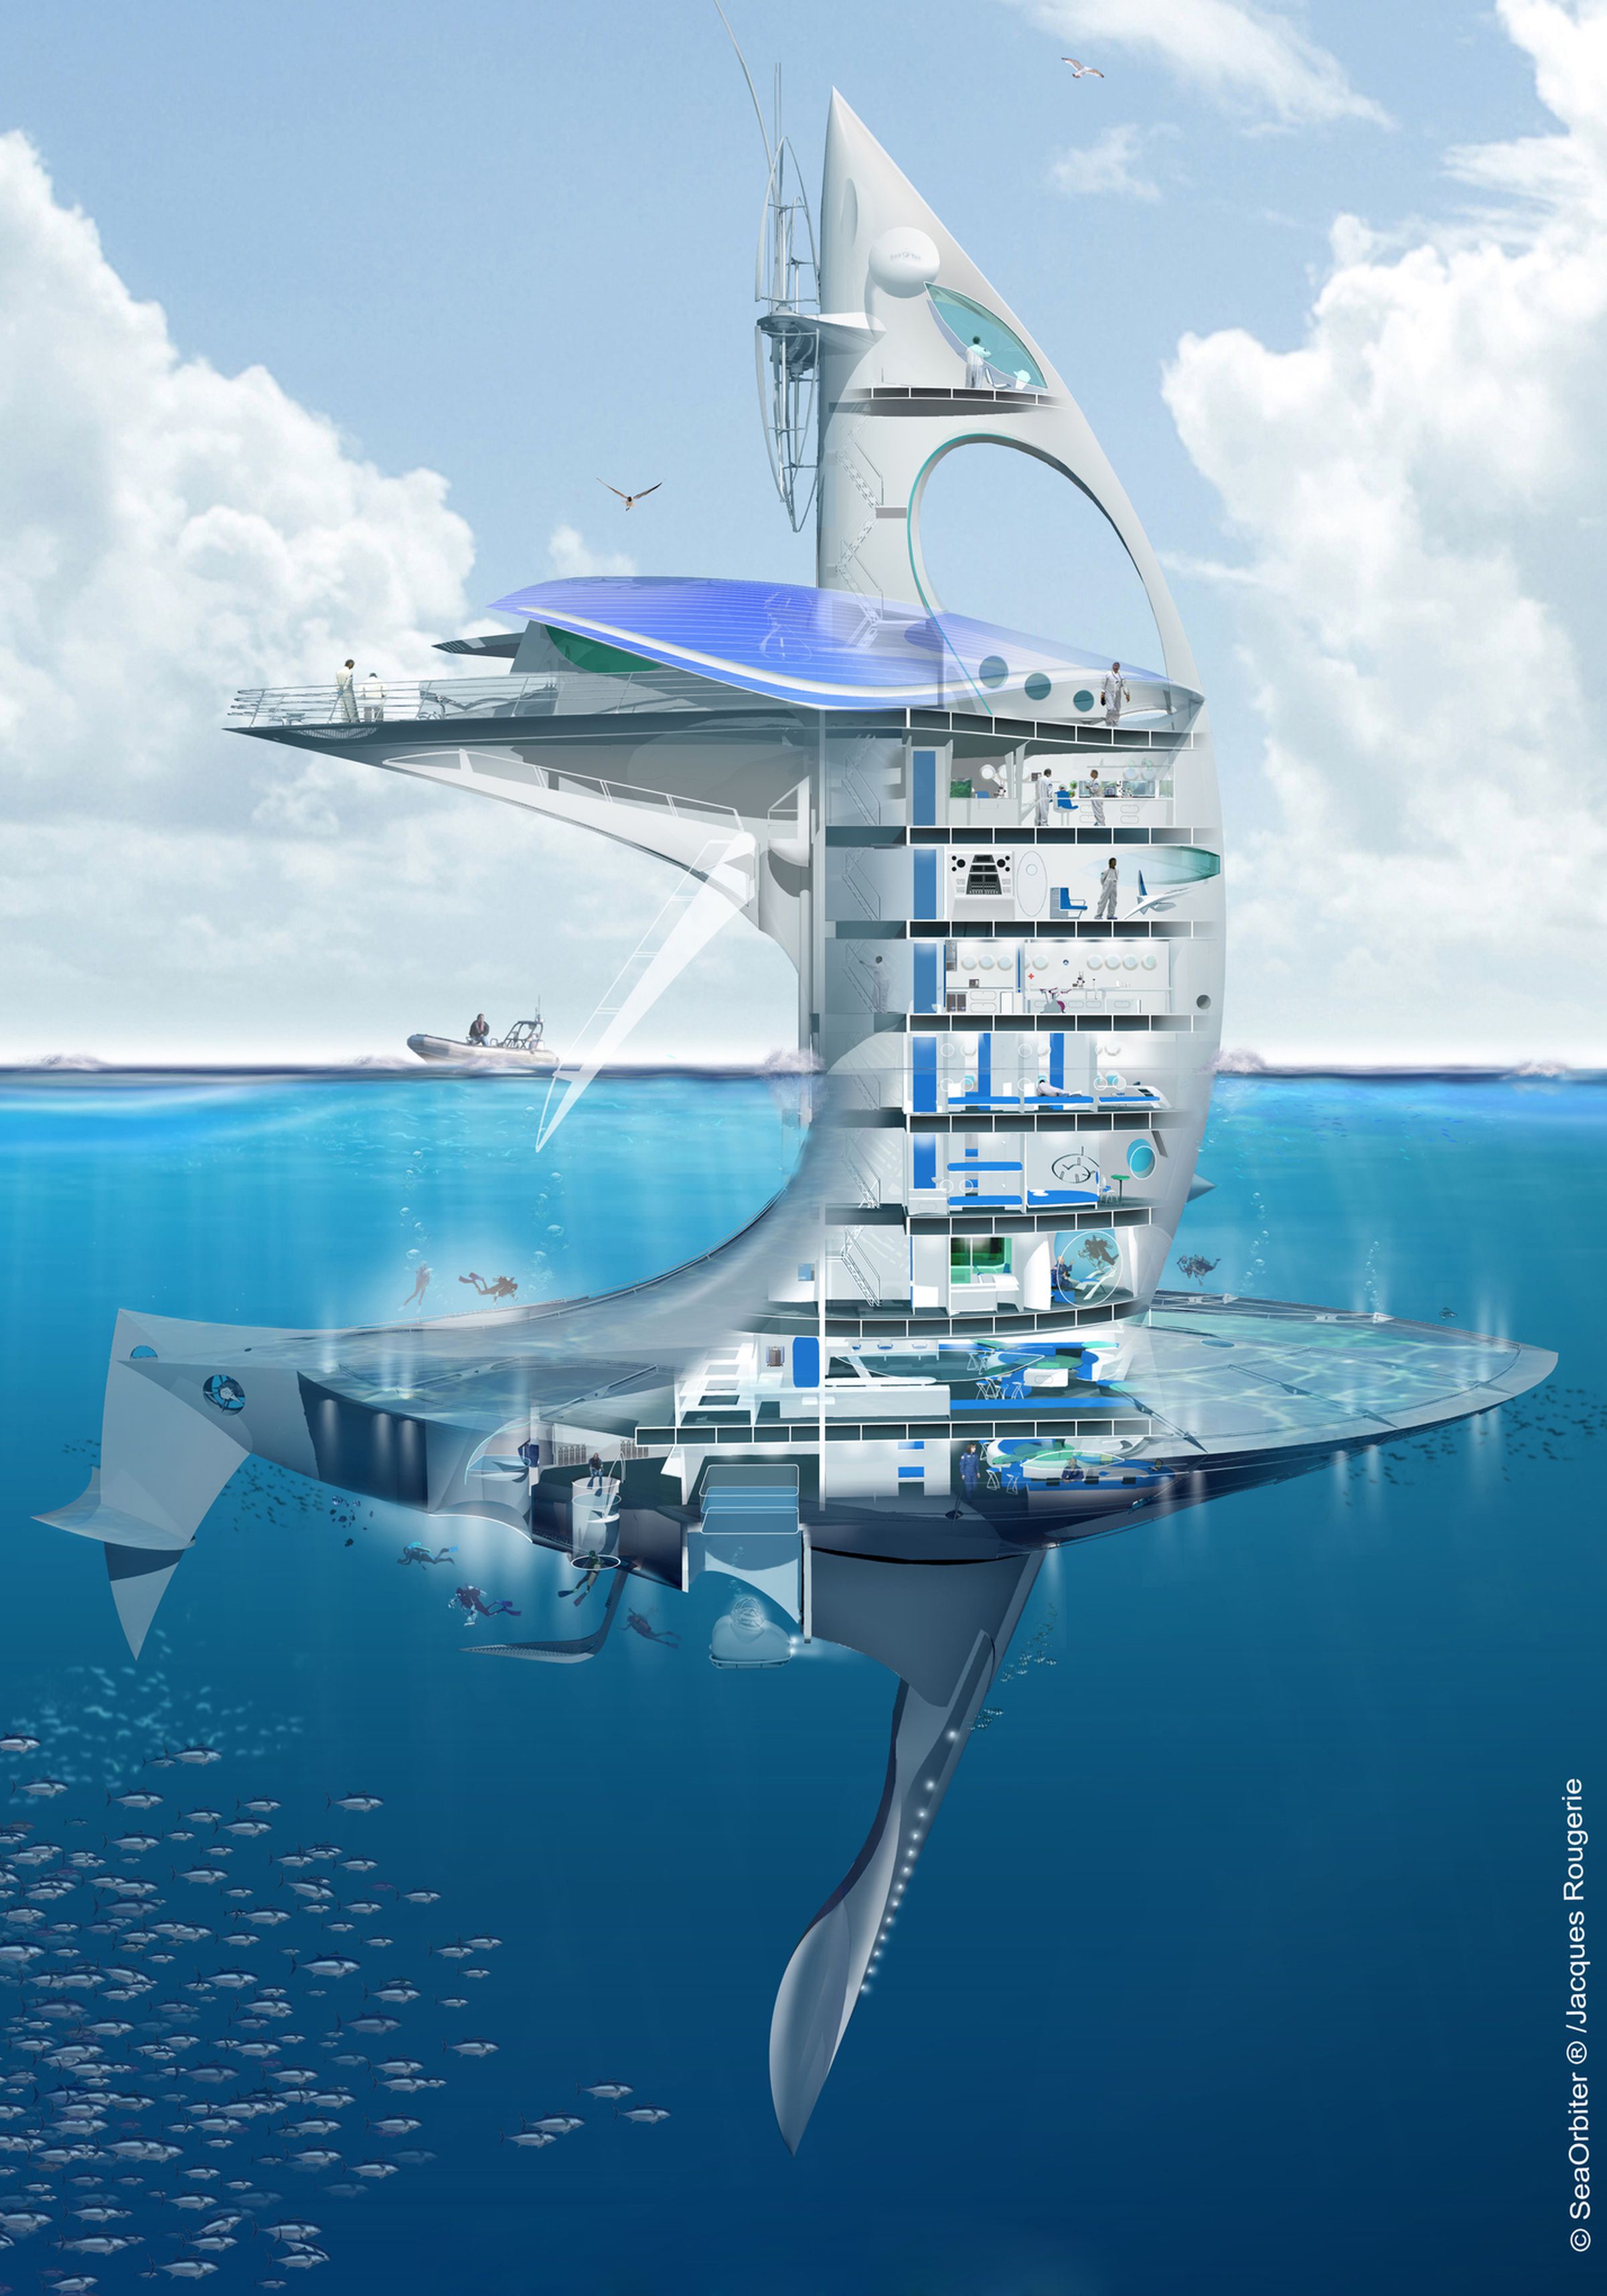 SeaOrbiter, a spaceship for Earth's oceans